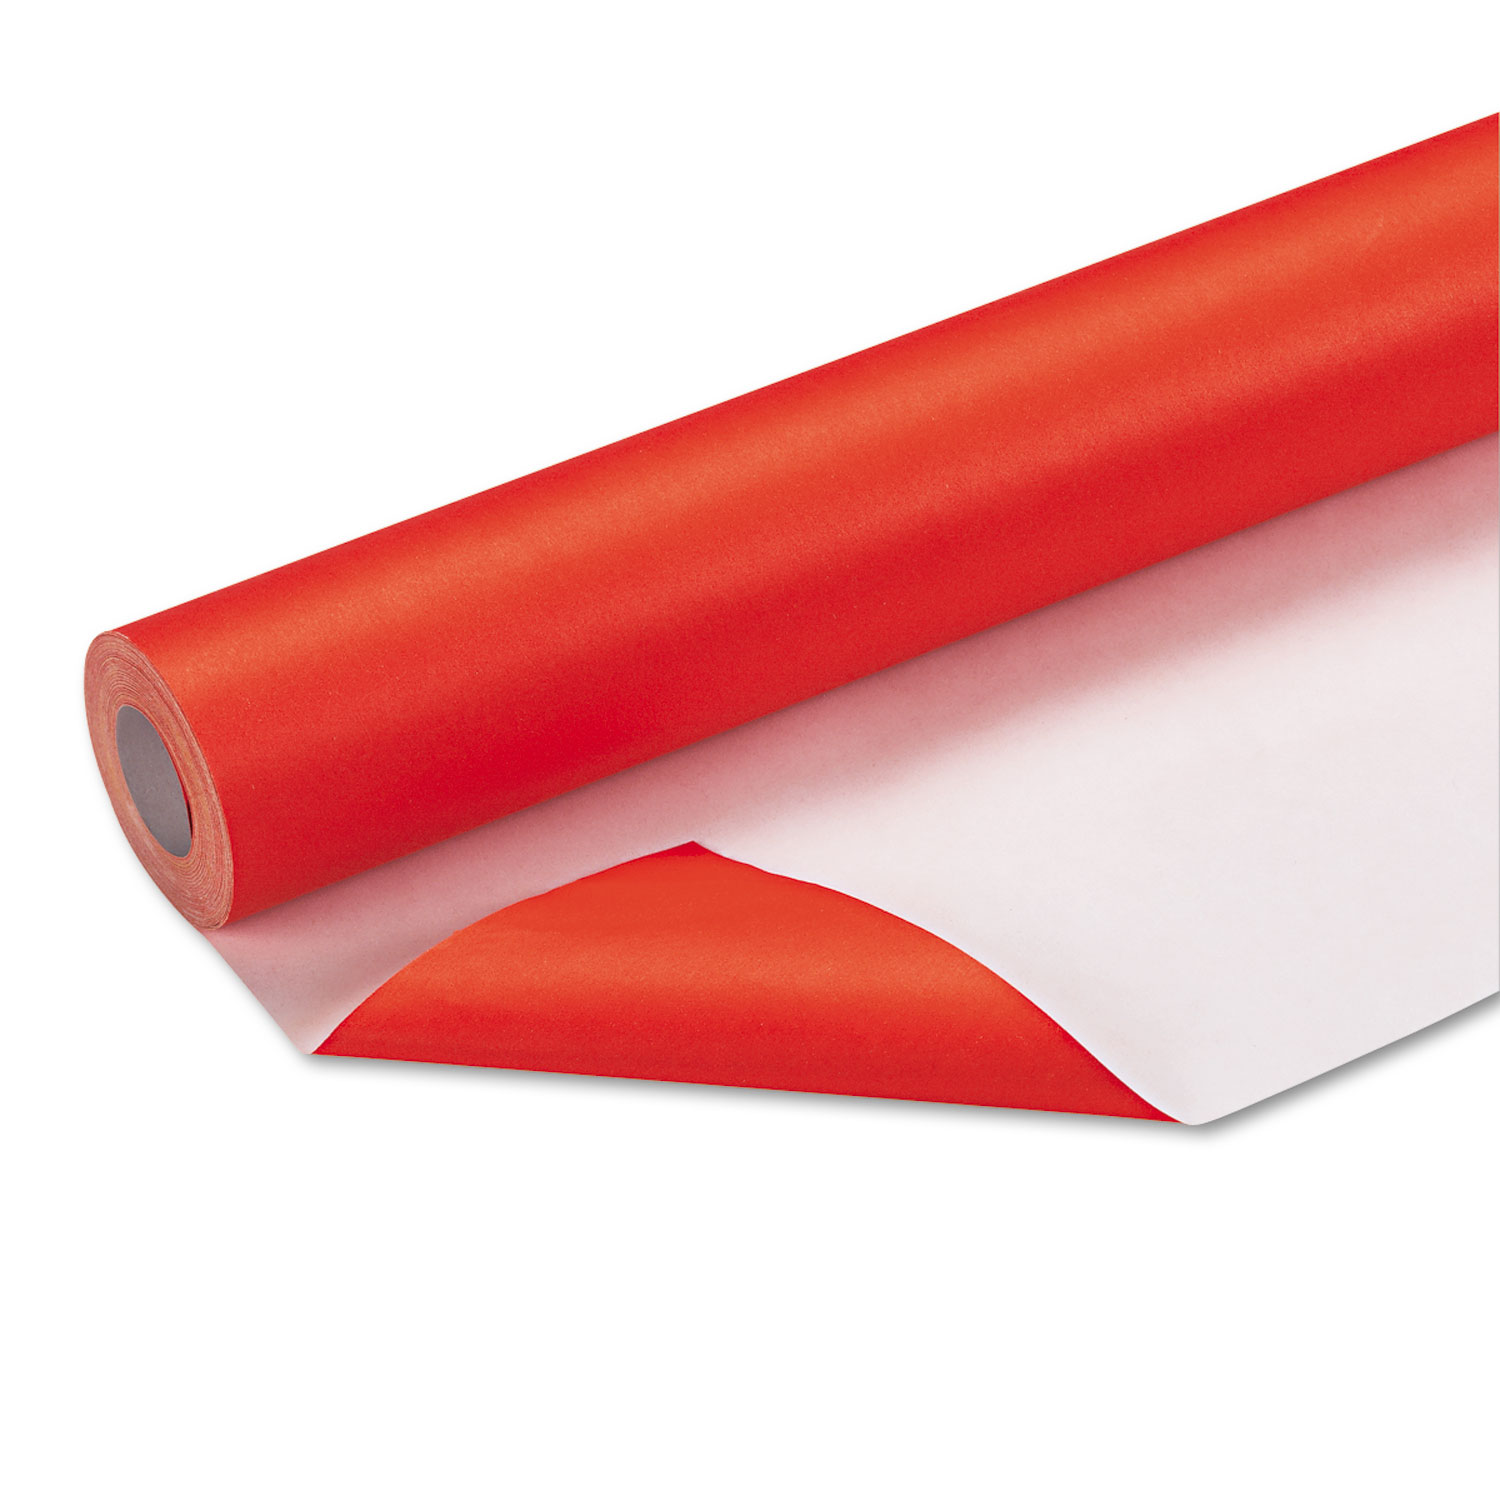  Pacon 57105 Fadeless Paper Roll, 50lb, 48 x 50ft, Orange (PAC57105) 